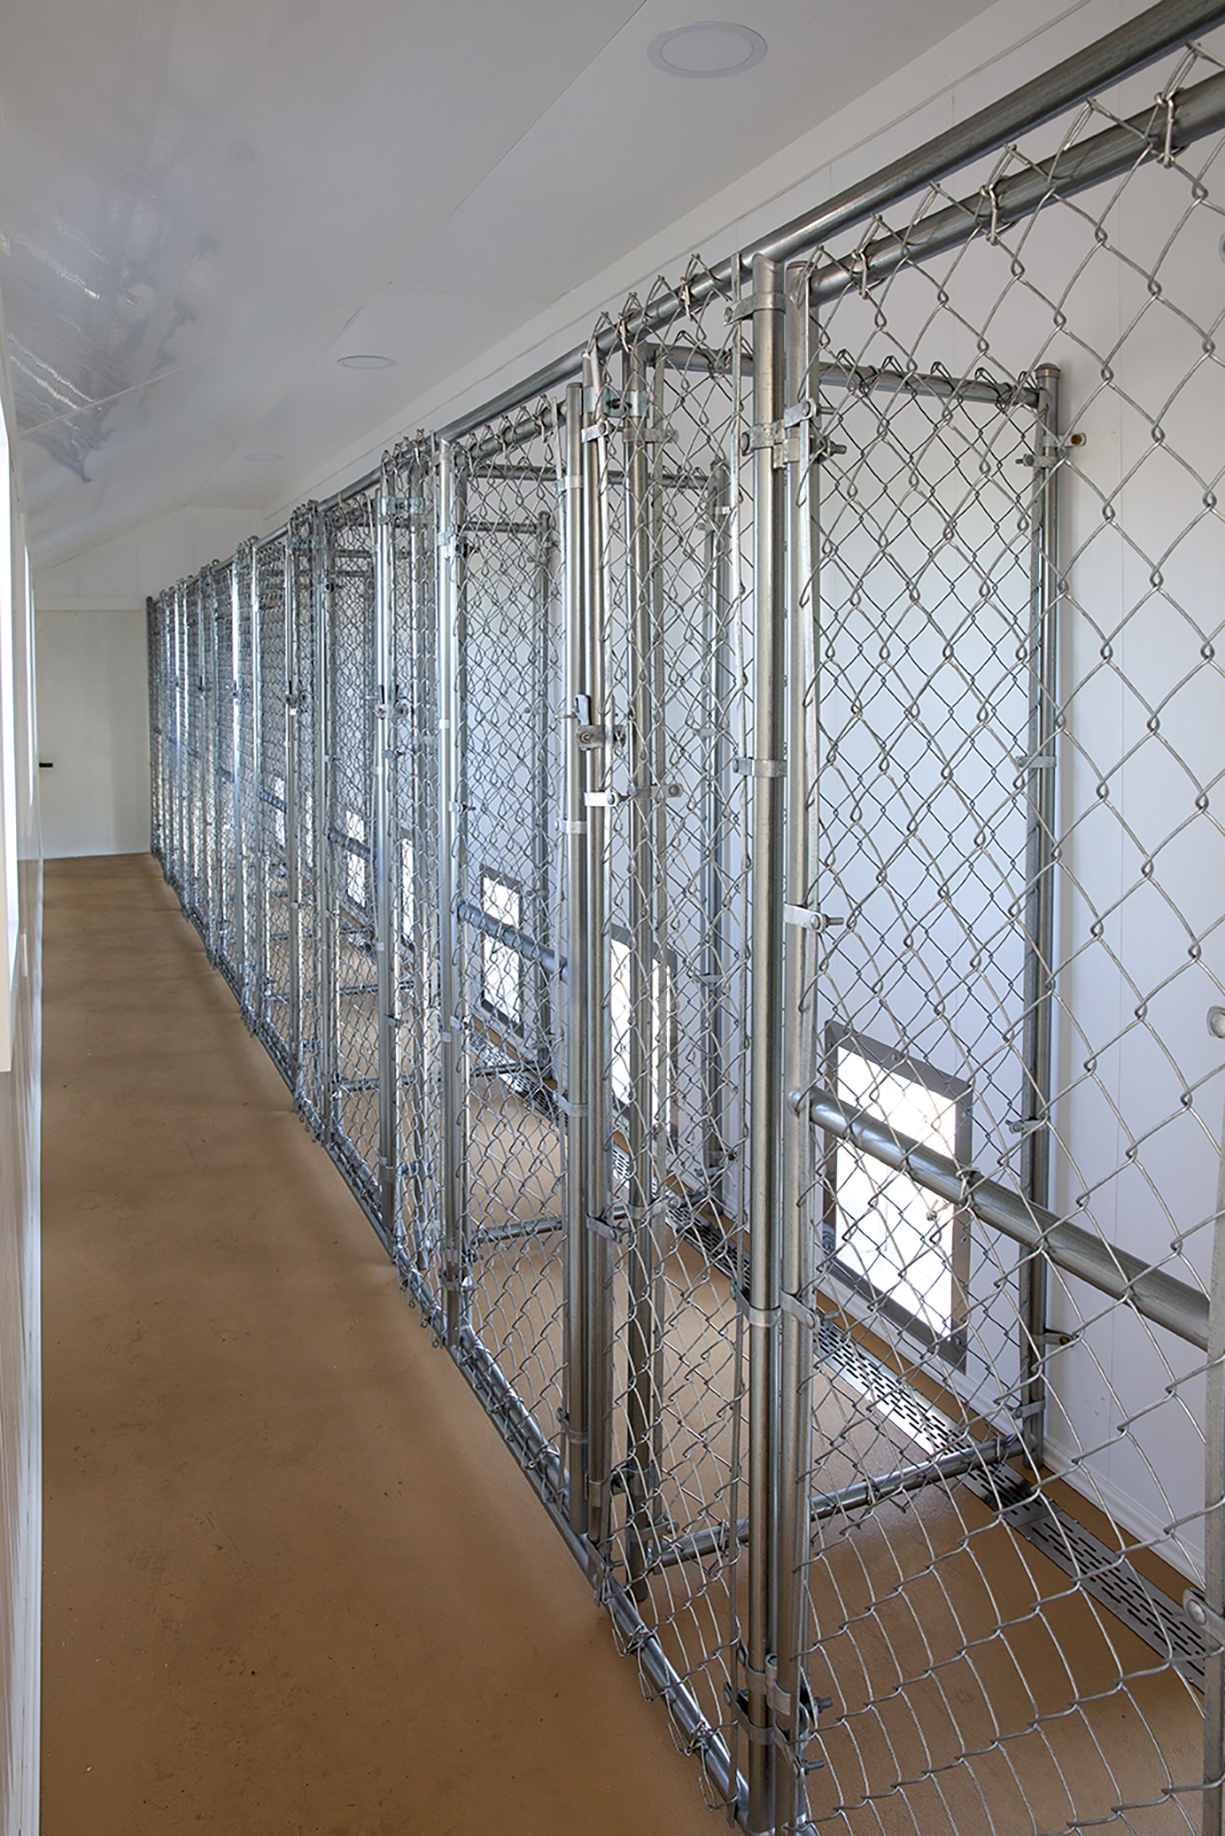 Interior of a 12x42 kennel